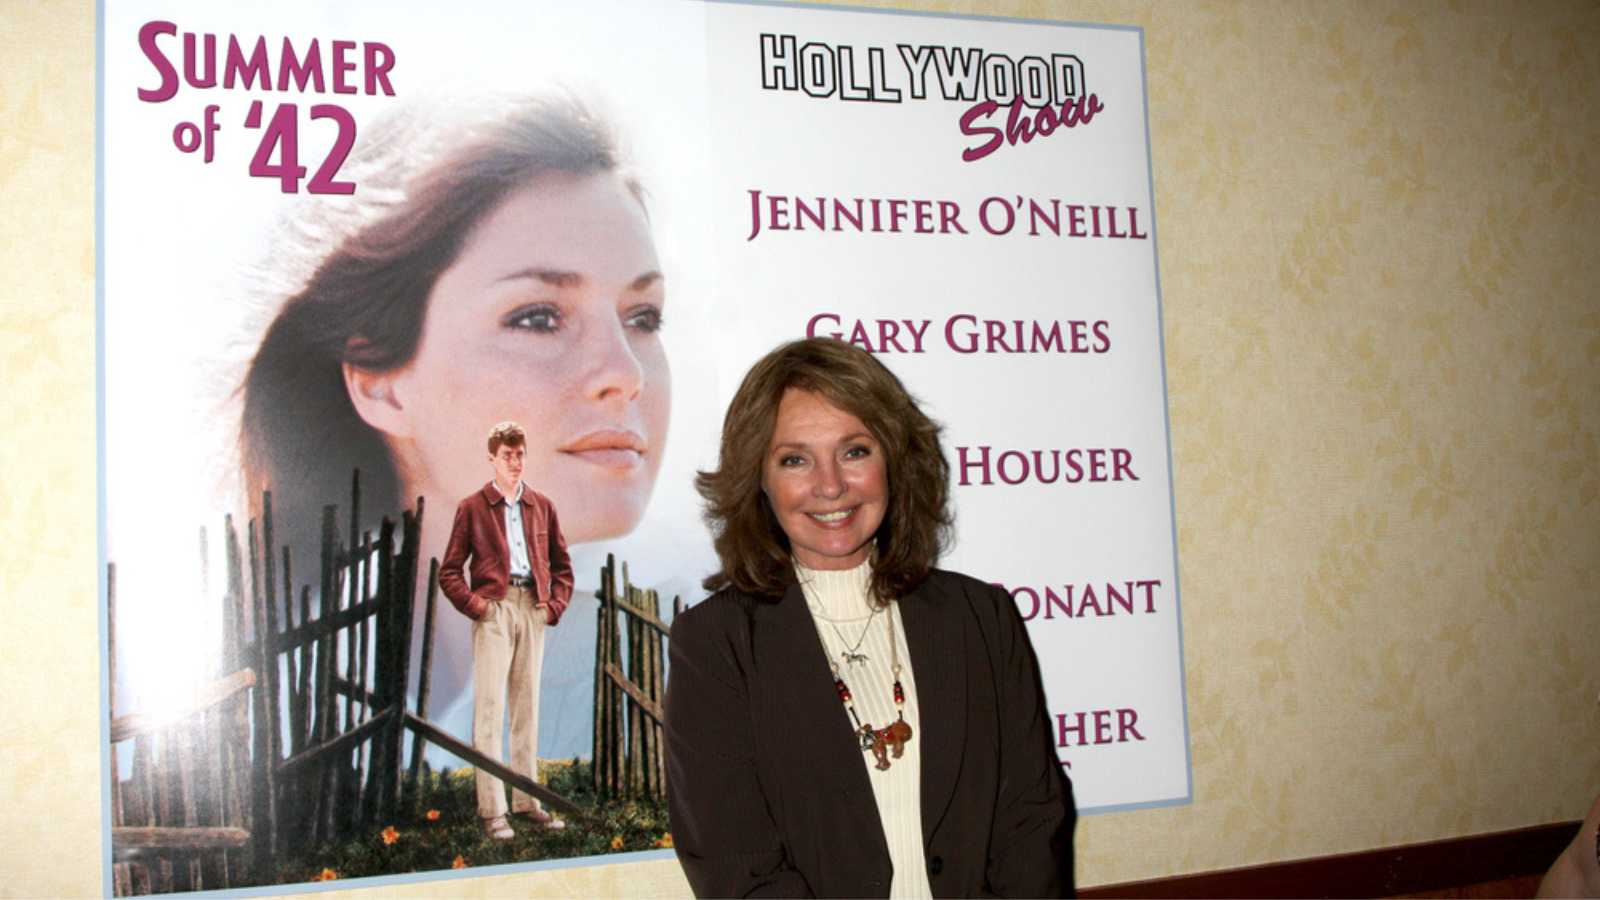 LOS ANGELES - OCT 9: Jennifer O'Neill at the Hollywood Show at Marriott Convention Center.Theatre on October 9, 2010 in Burbank, CA